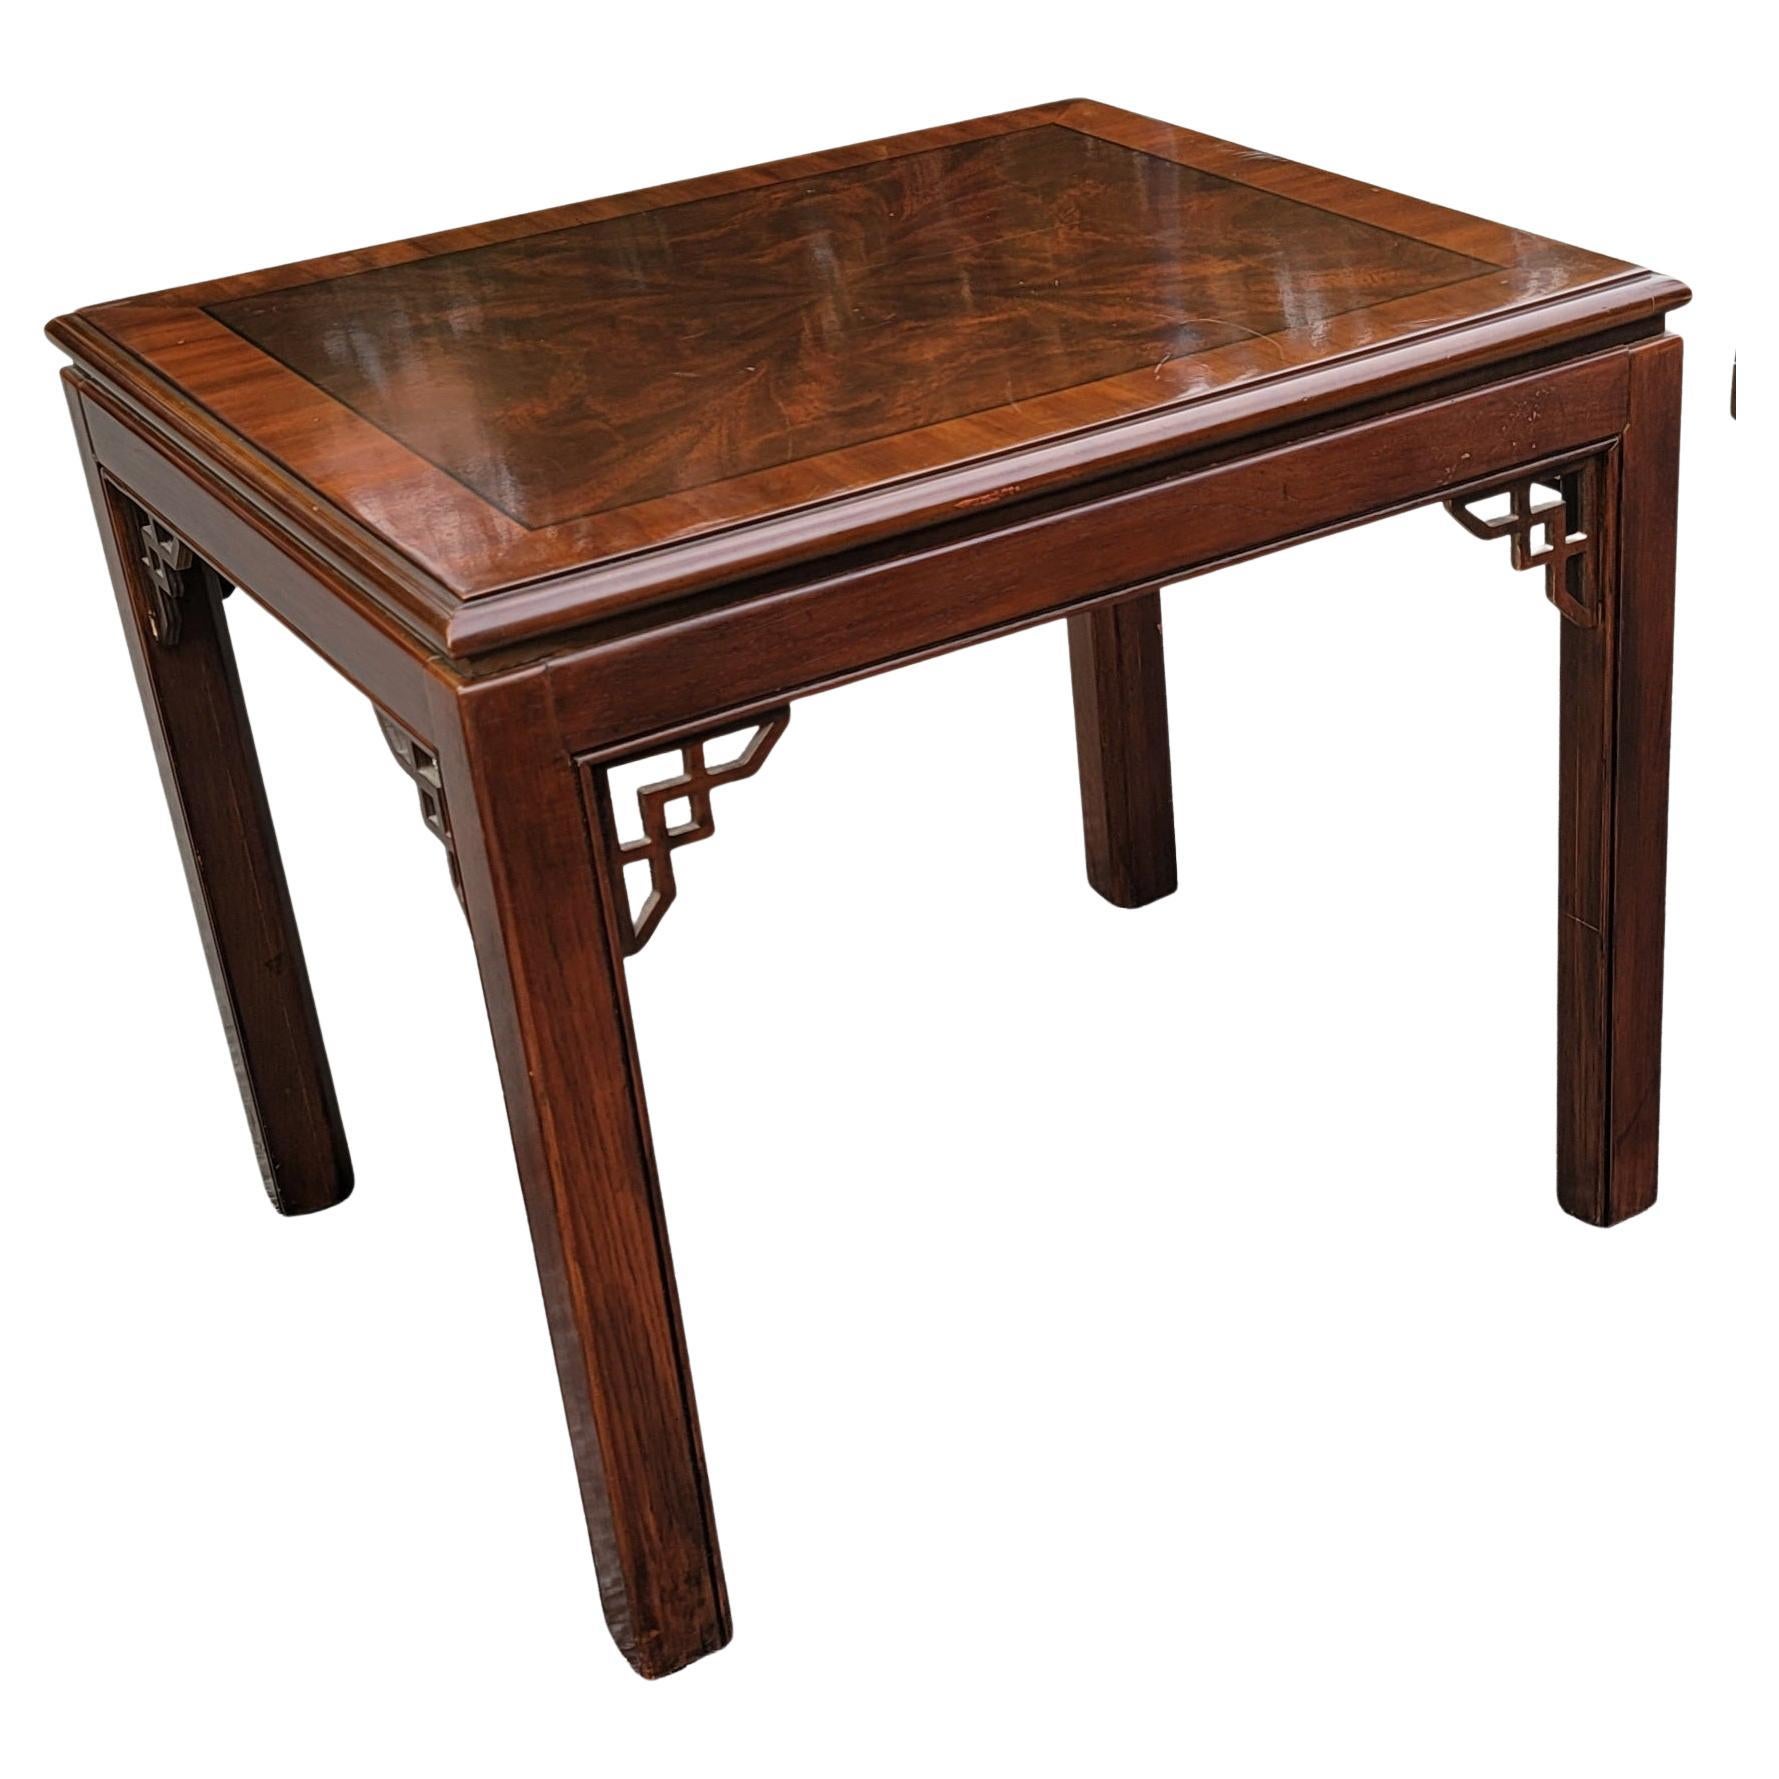 A charming Drexel Furniture Chippendale Collection burled mahogany side table in good vintage condition. 
Measures 22